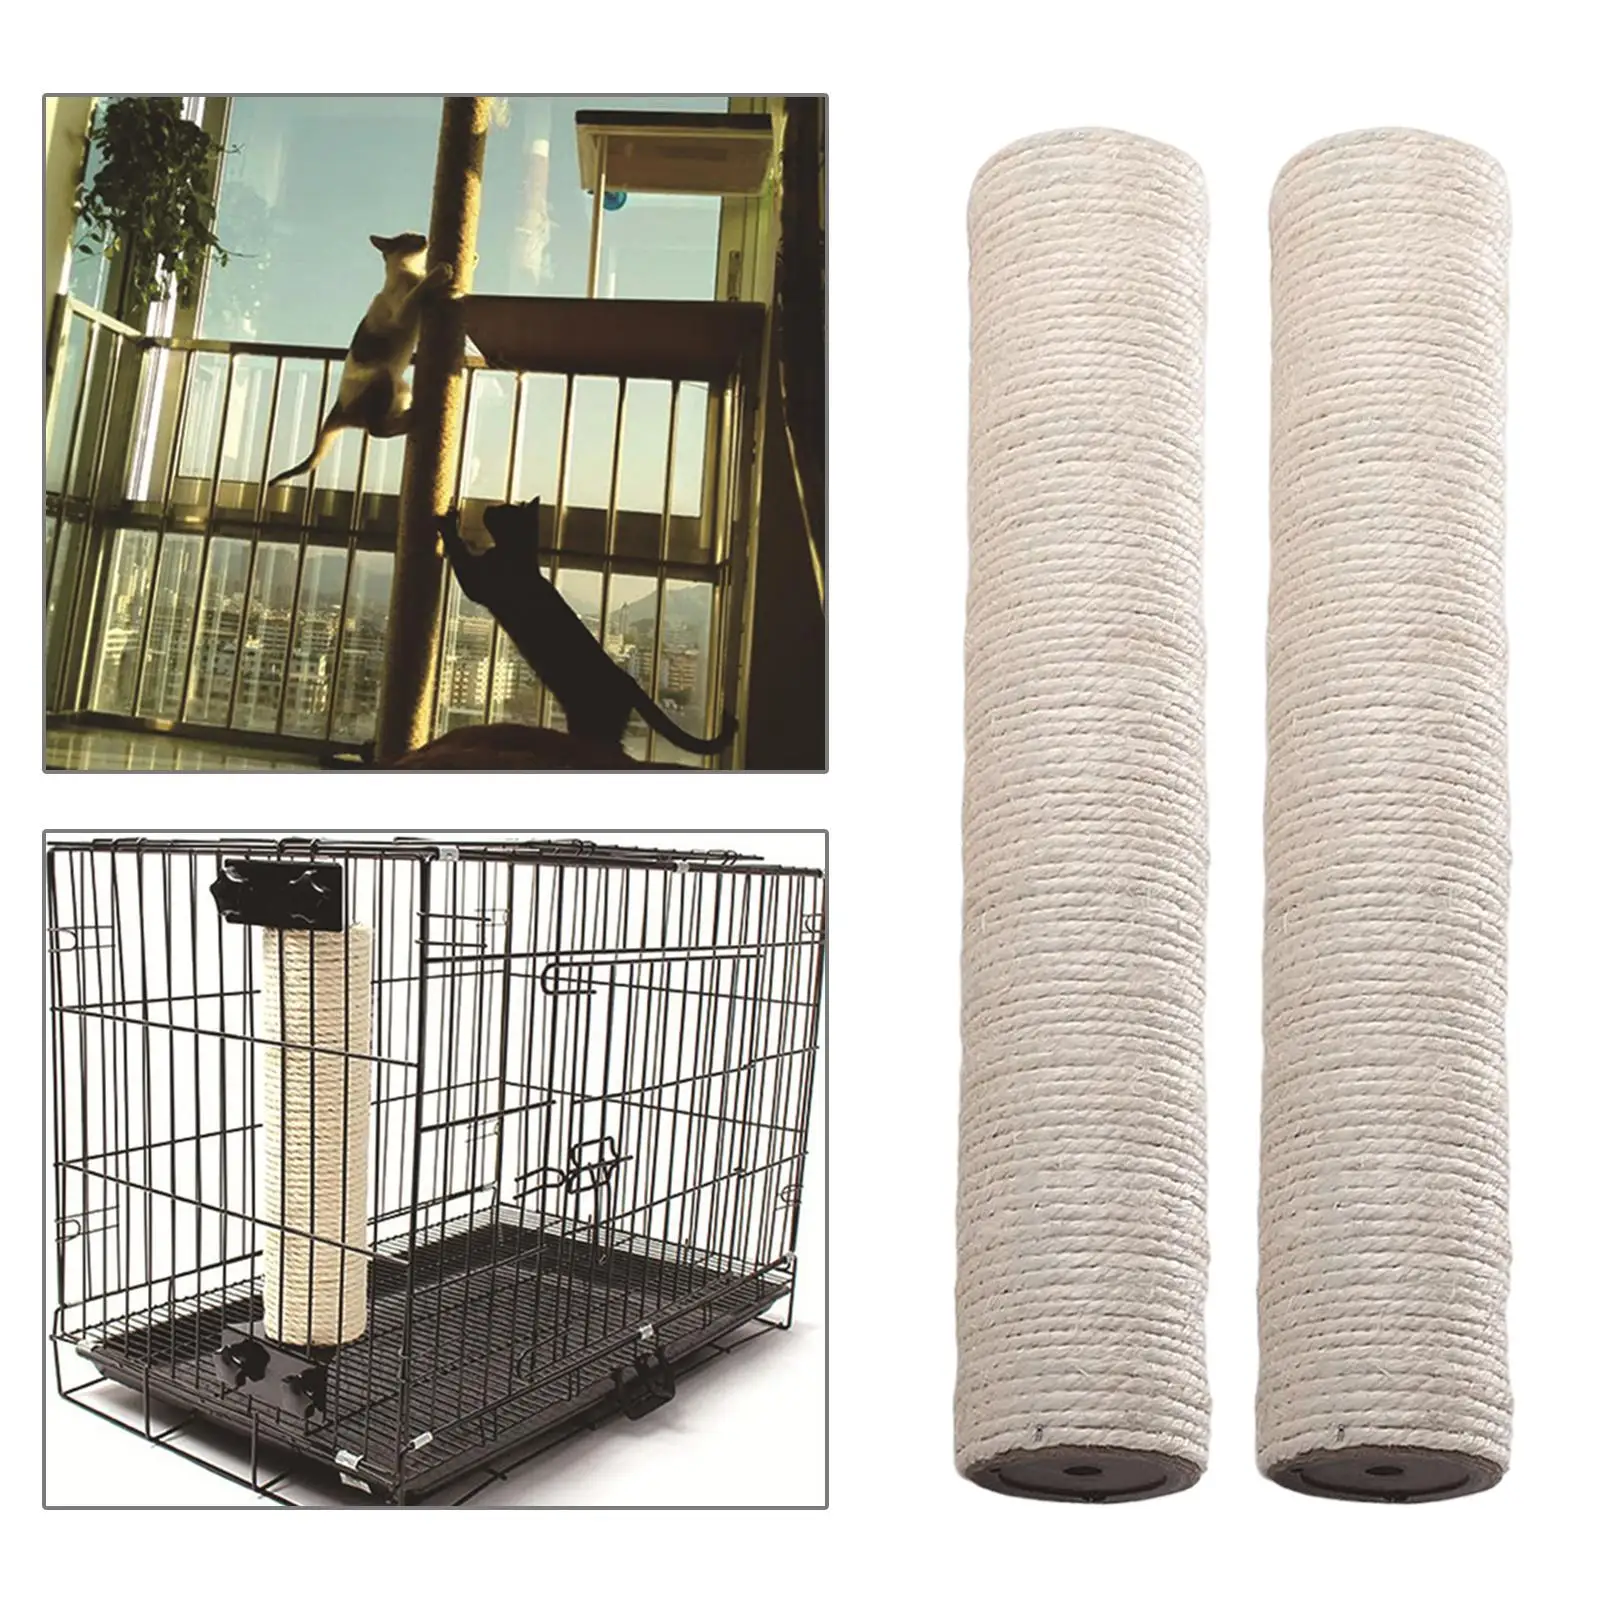  Rope Scratching Post Replacement, Cats Climbing Post Scratch Posts Refills Interactive Toy Dia 7cm for Cats Kitten Pet